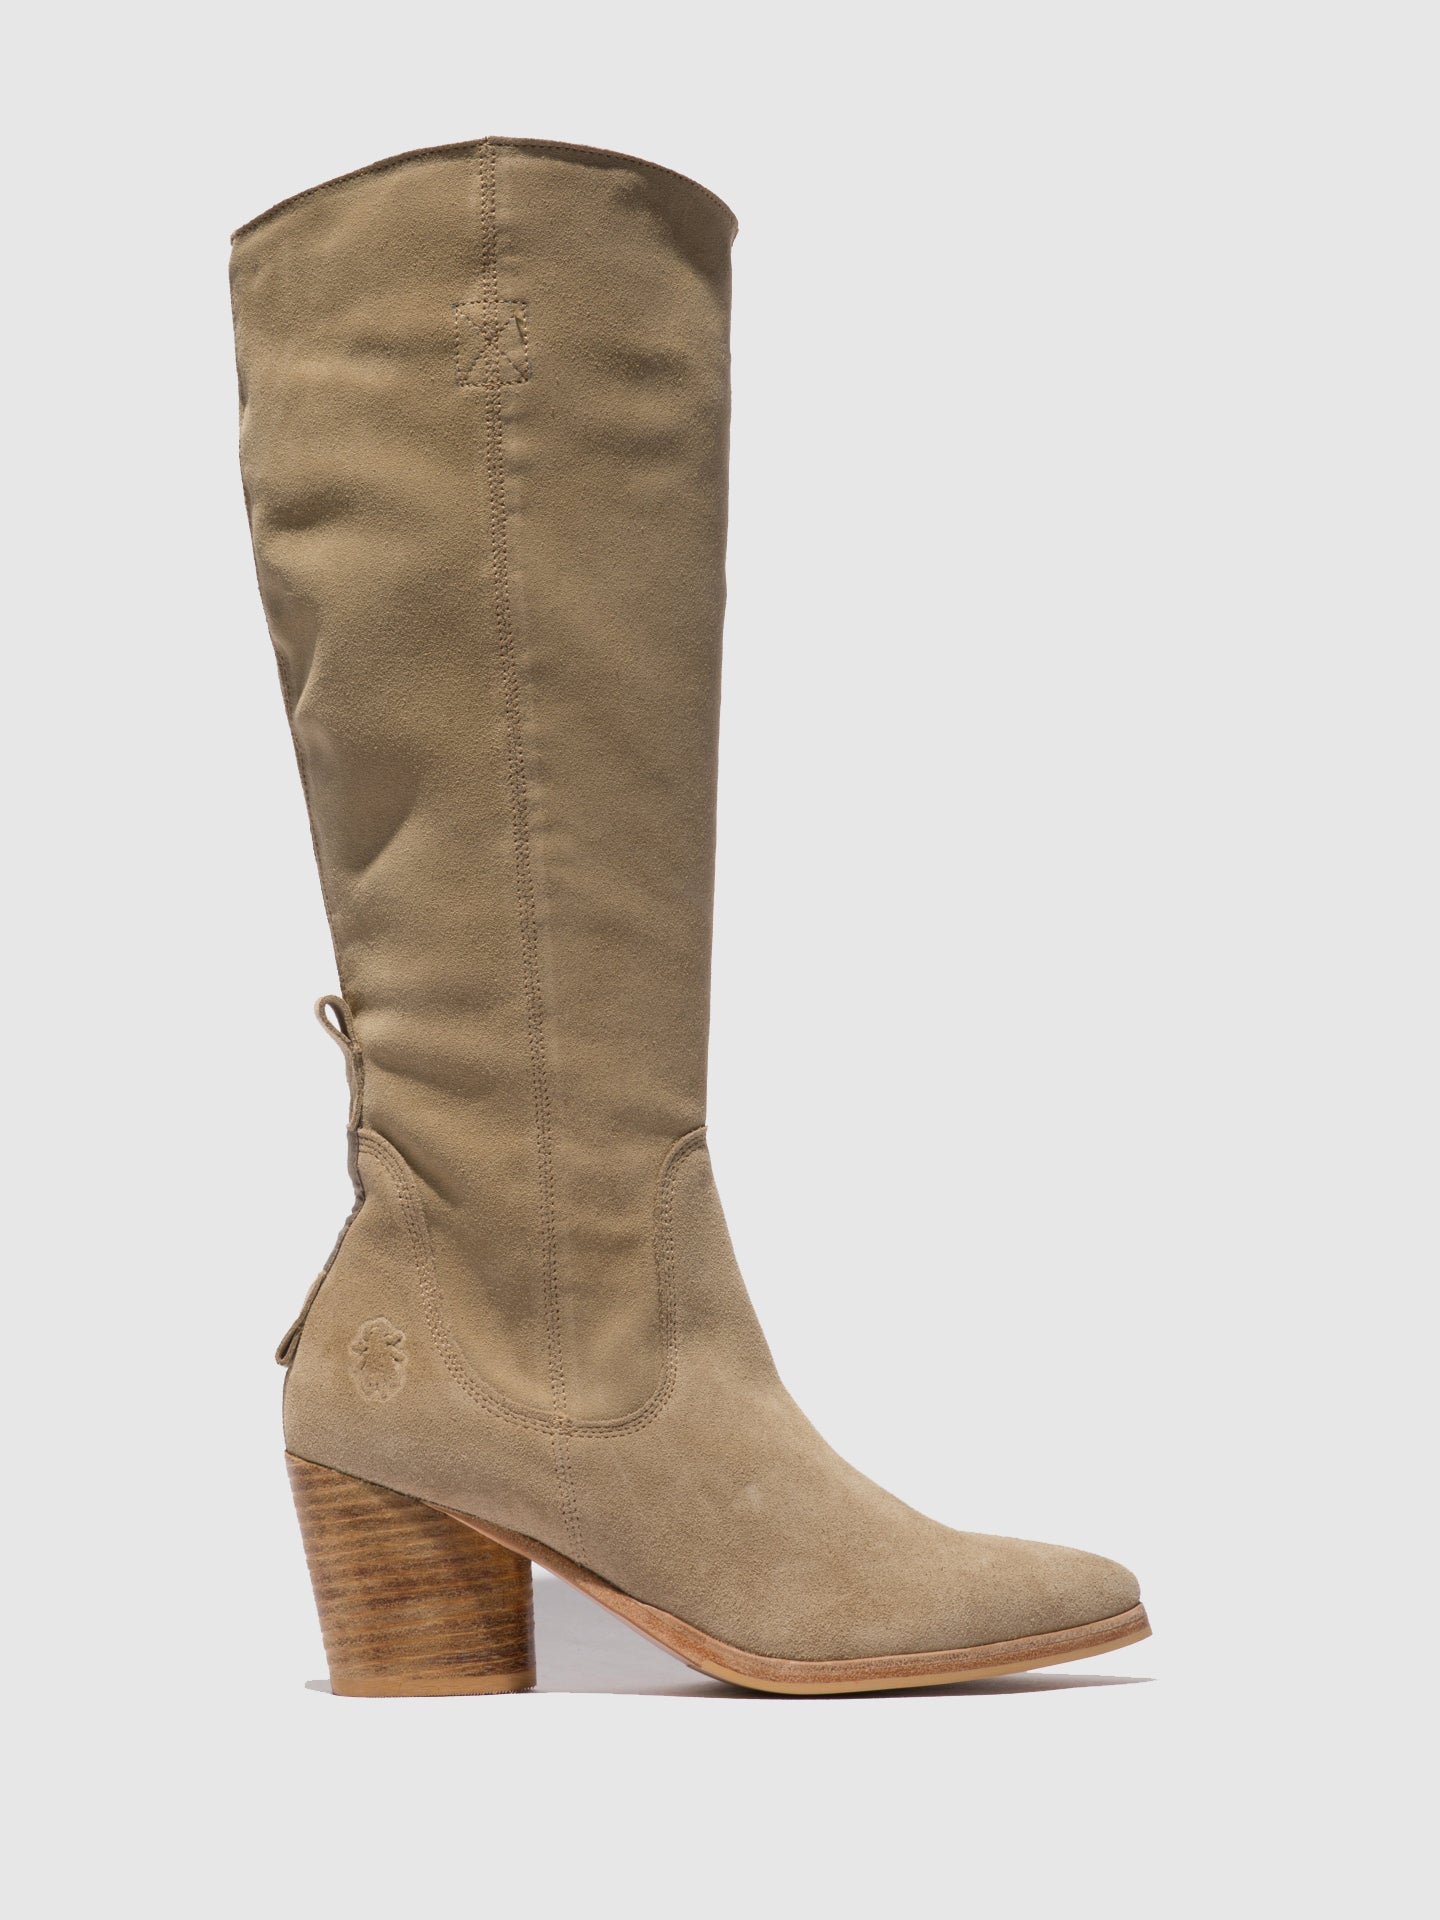 Fly London Zip Up Boots AMES826FLY SUEDE CREME